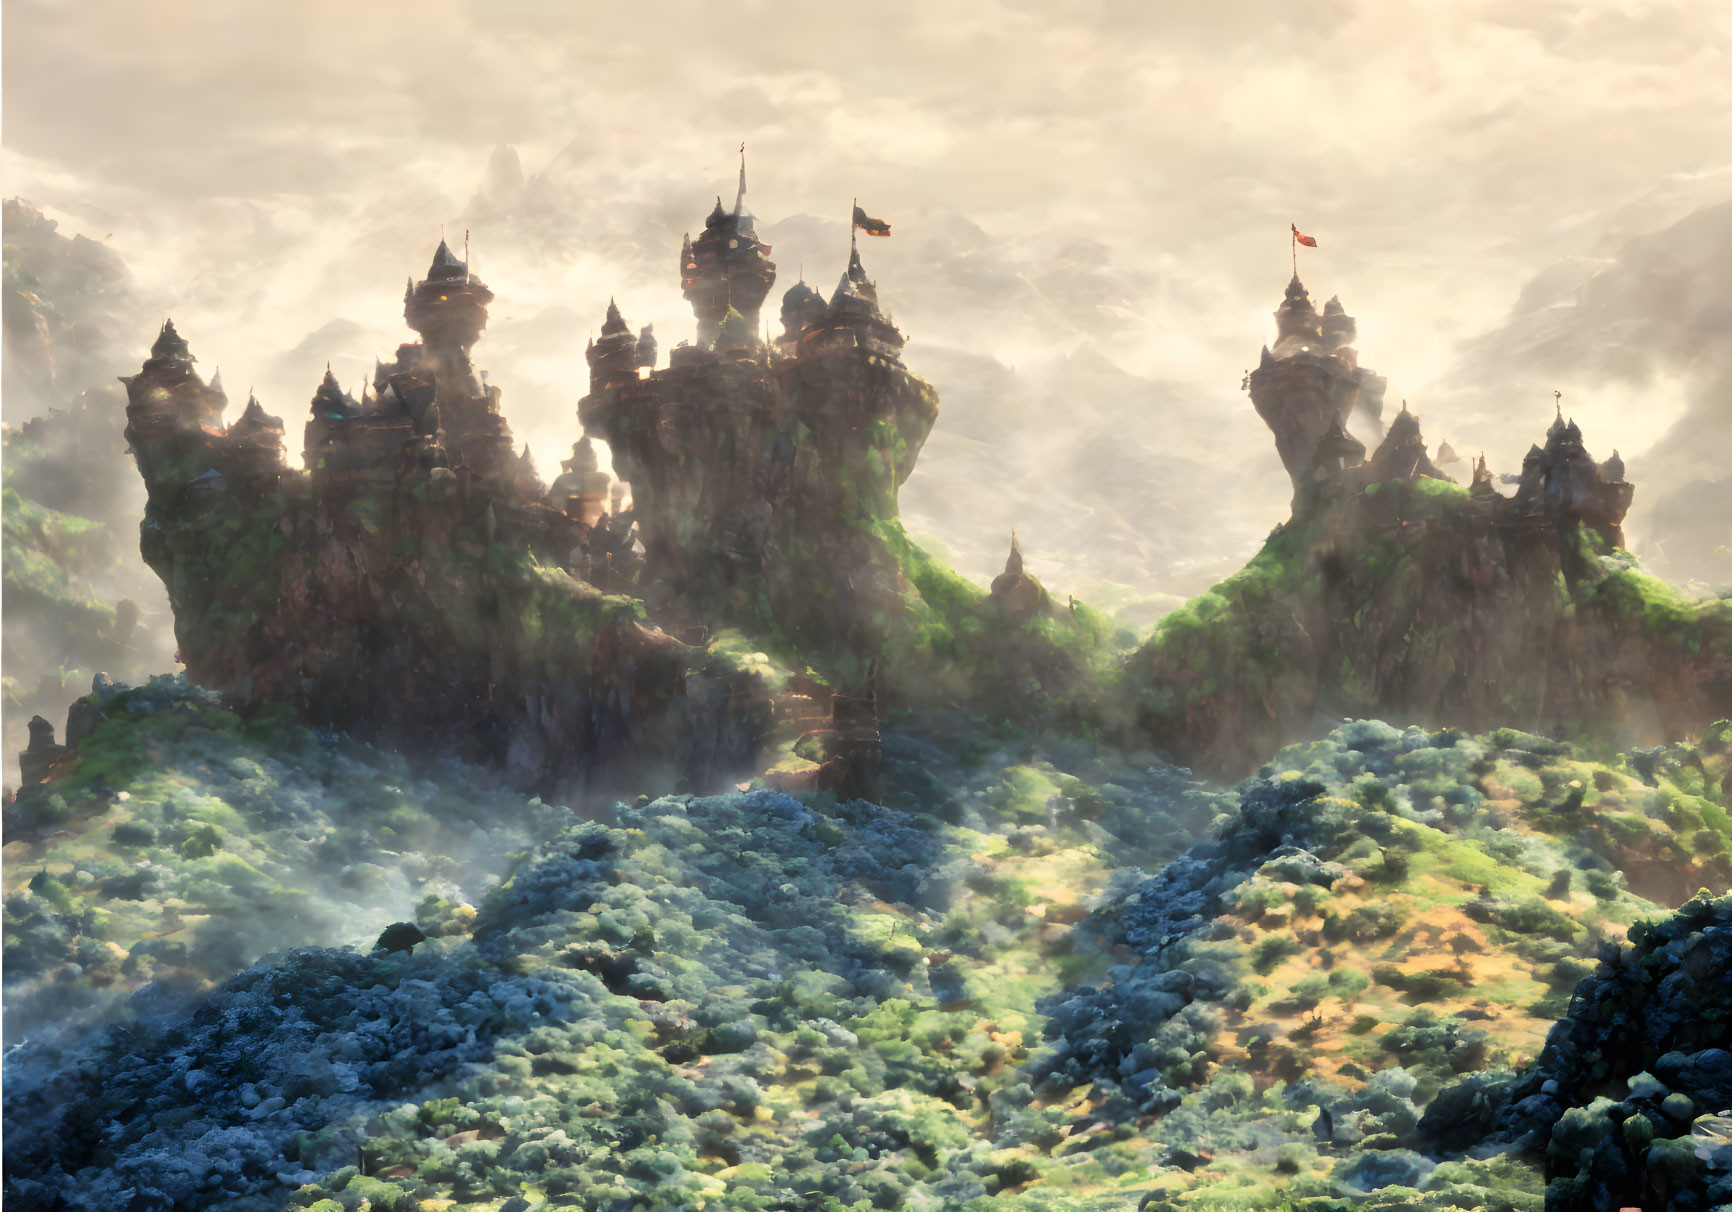 Misty fantasy landscape with mountains, castles, and glowing light